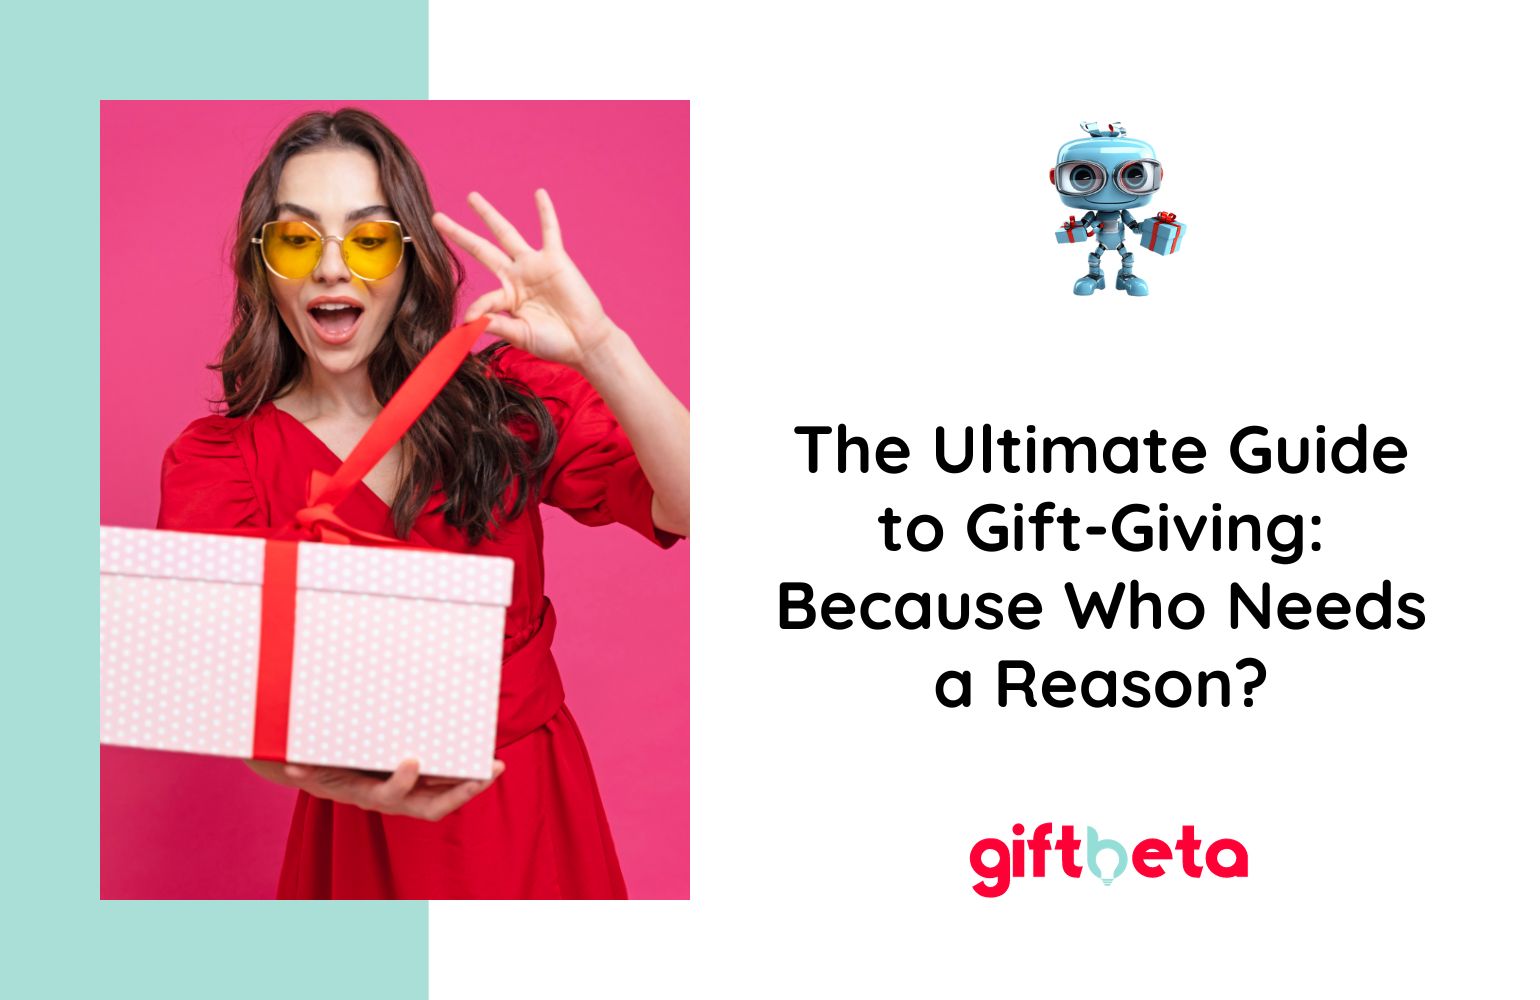 The Ultimate Guide to Gift-Giving: Because Who Needs a Reason?